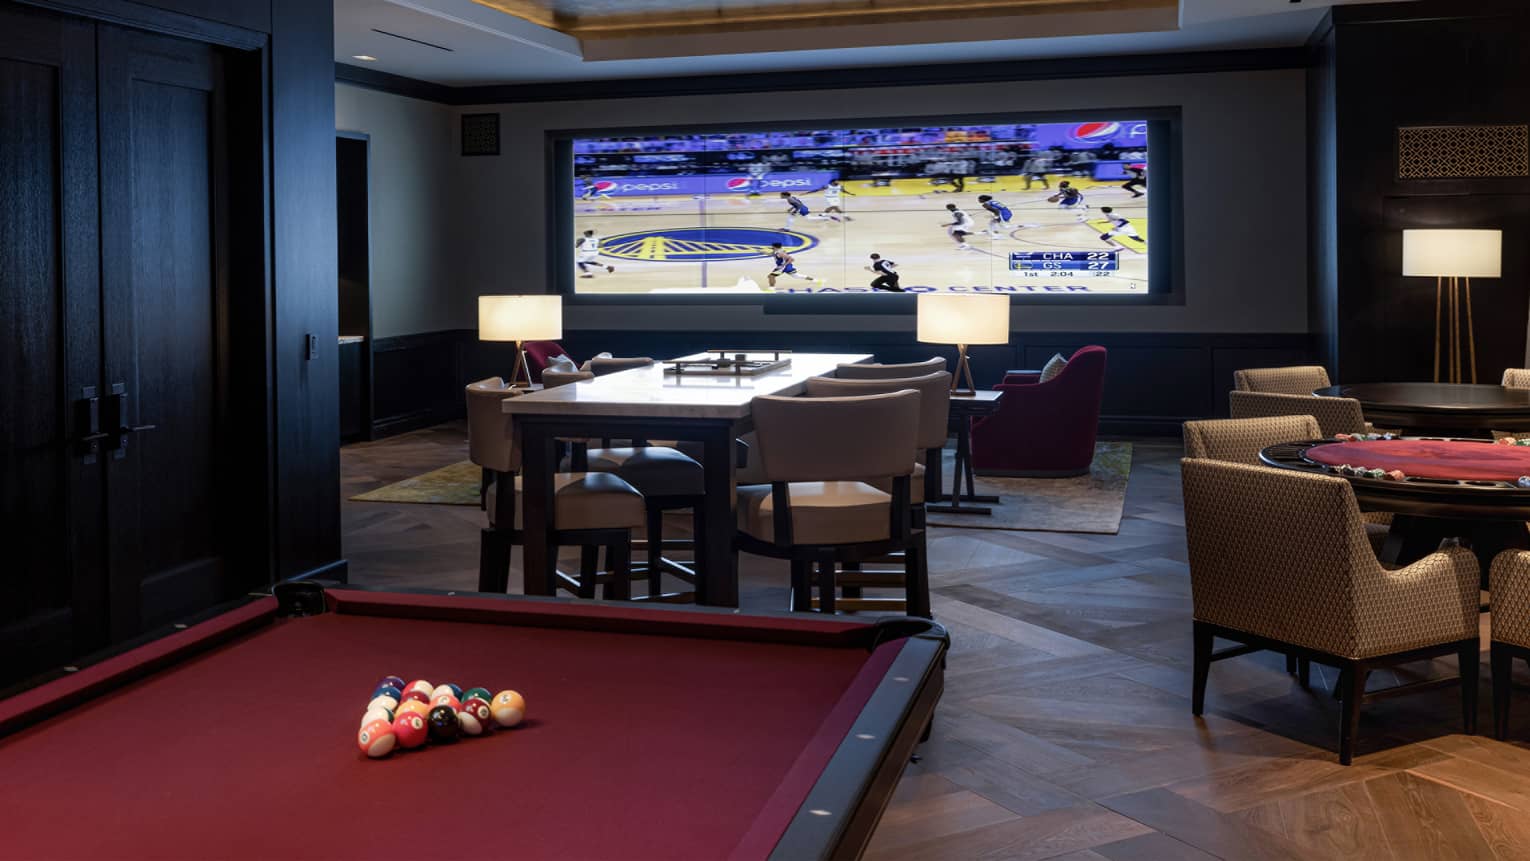 Games room with billiards table, card table and large screen playing a basketball game.